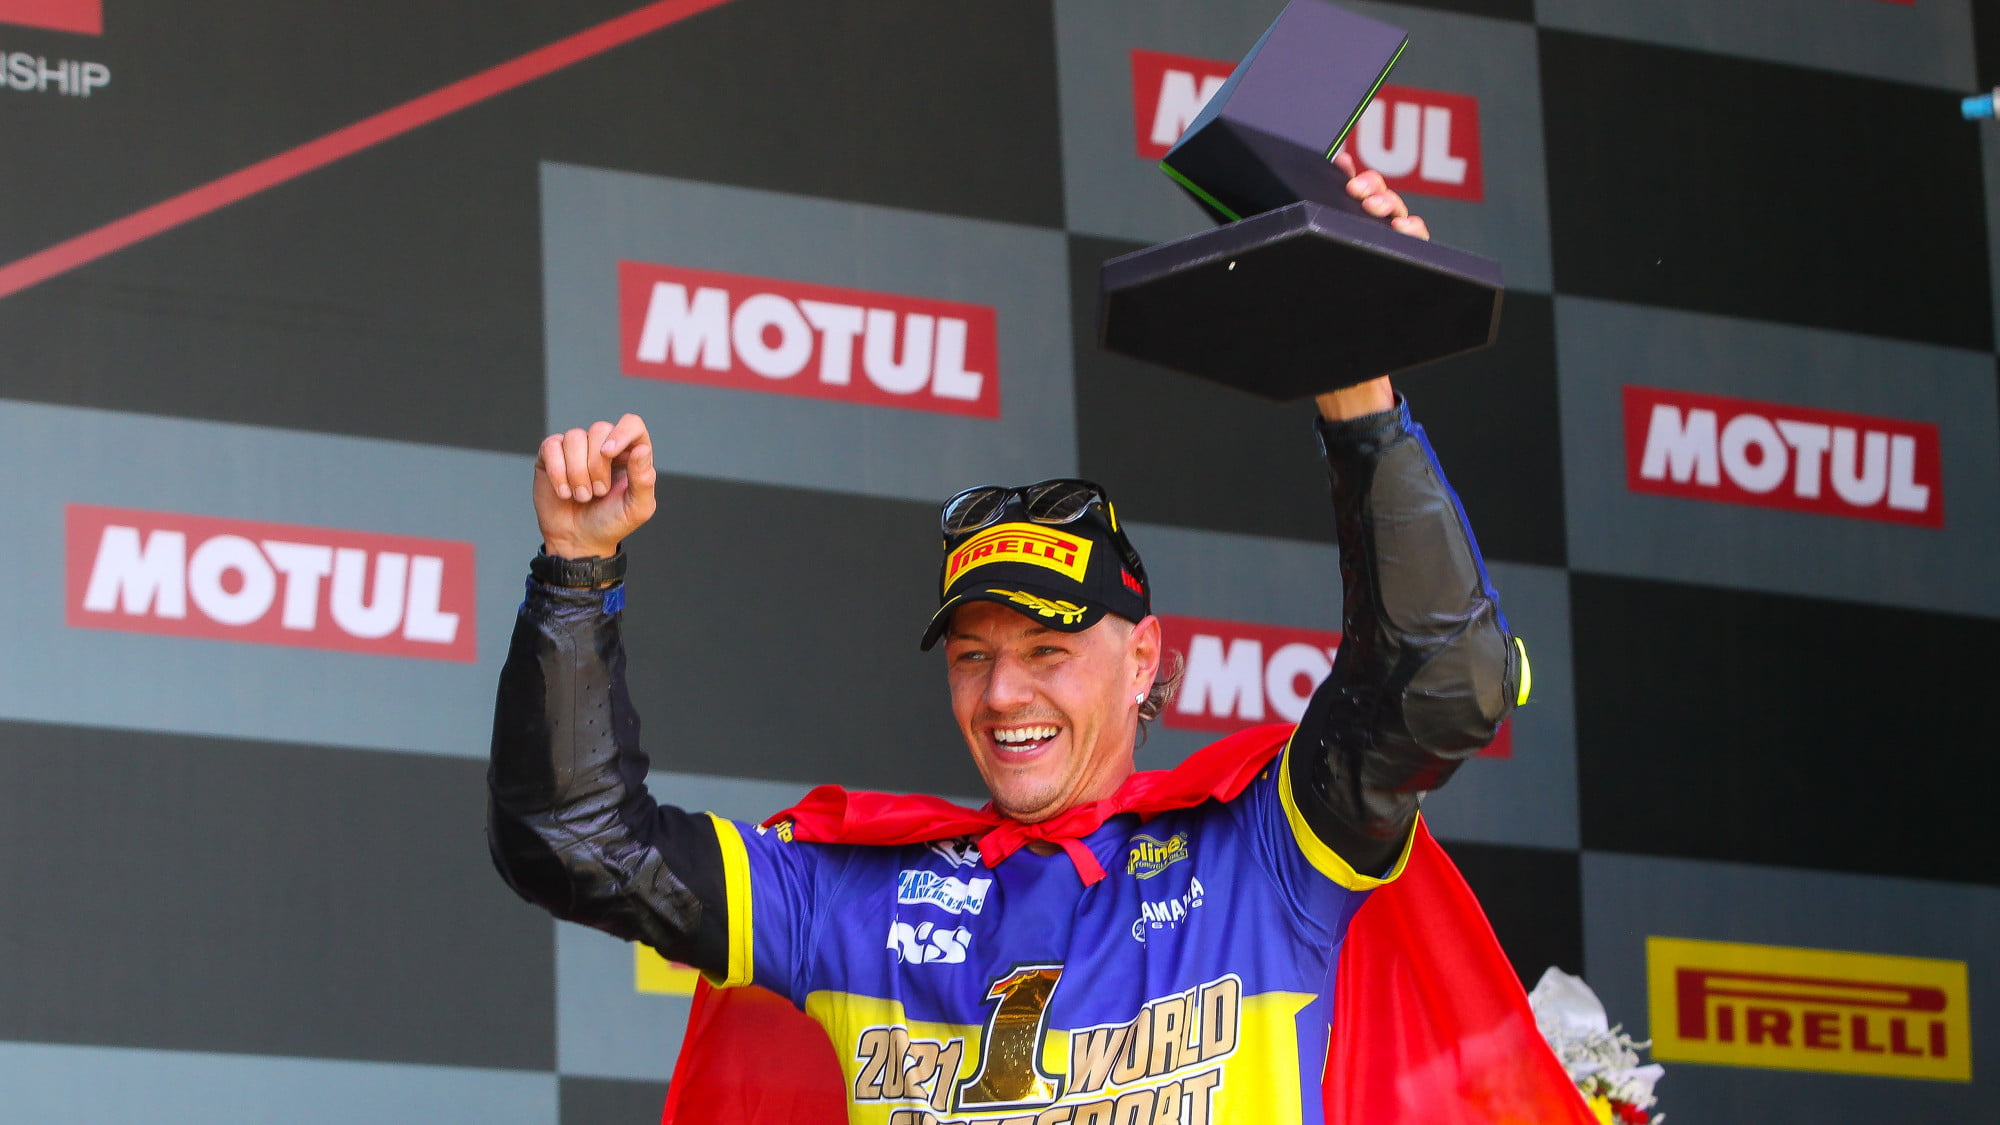 OFFICIAL WSBK Supersport: Dominique Aegerter will put his title back on the line with Ten Kate